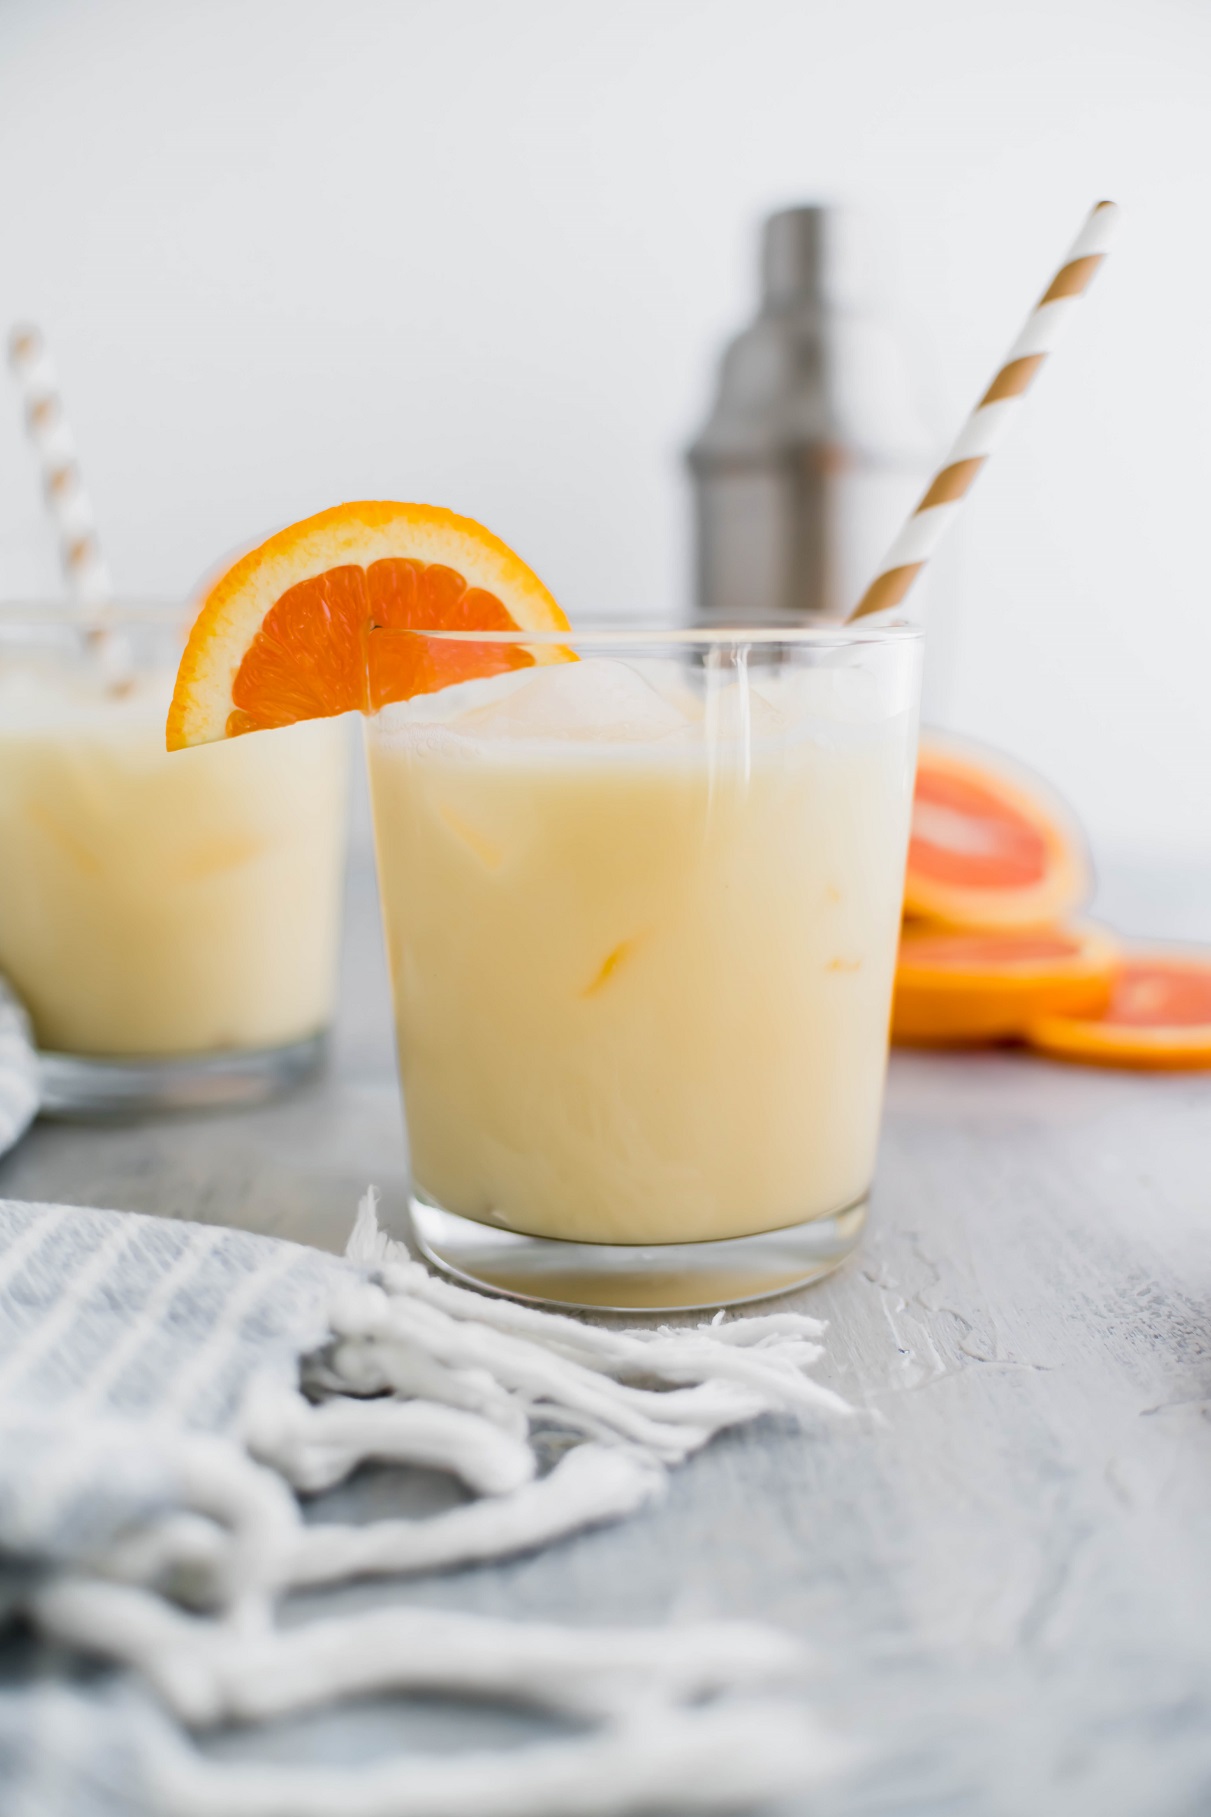 Two cocktail glasses filled with creamsicle cocktail with an orange slice garnish.